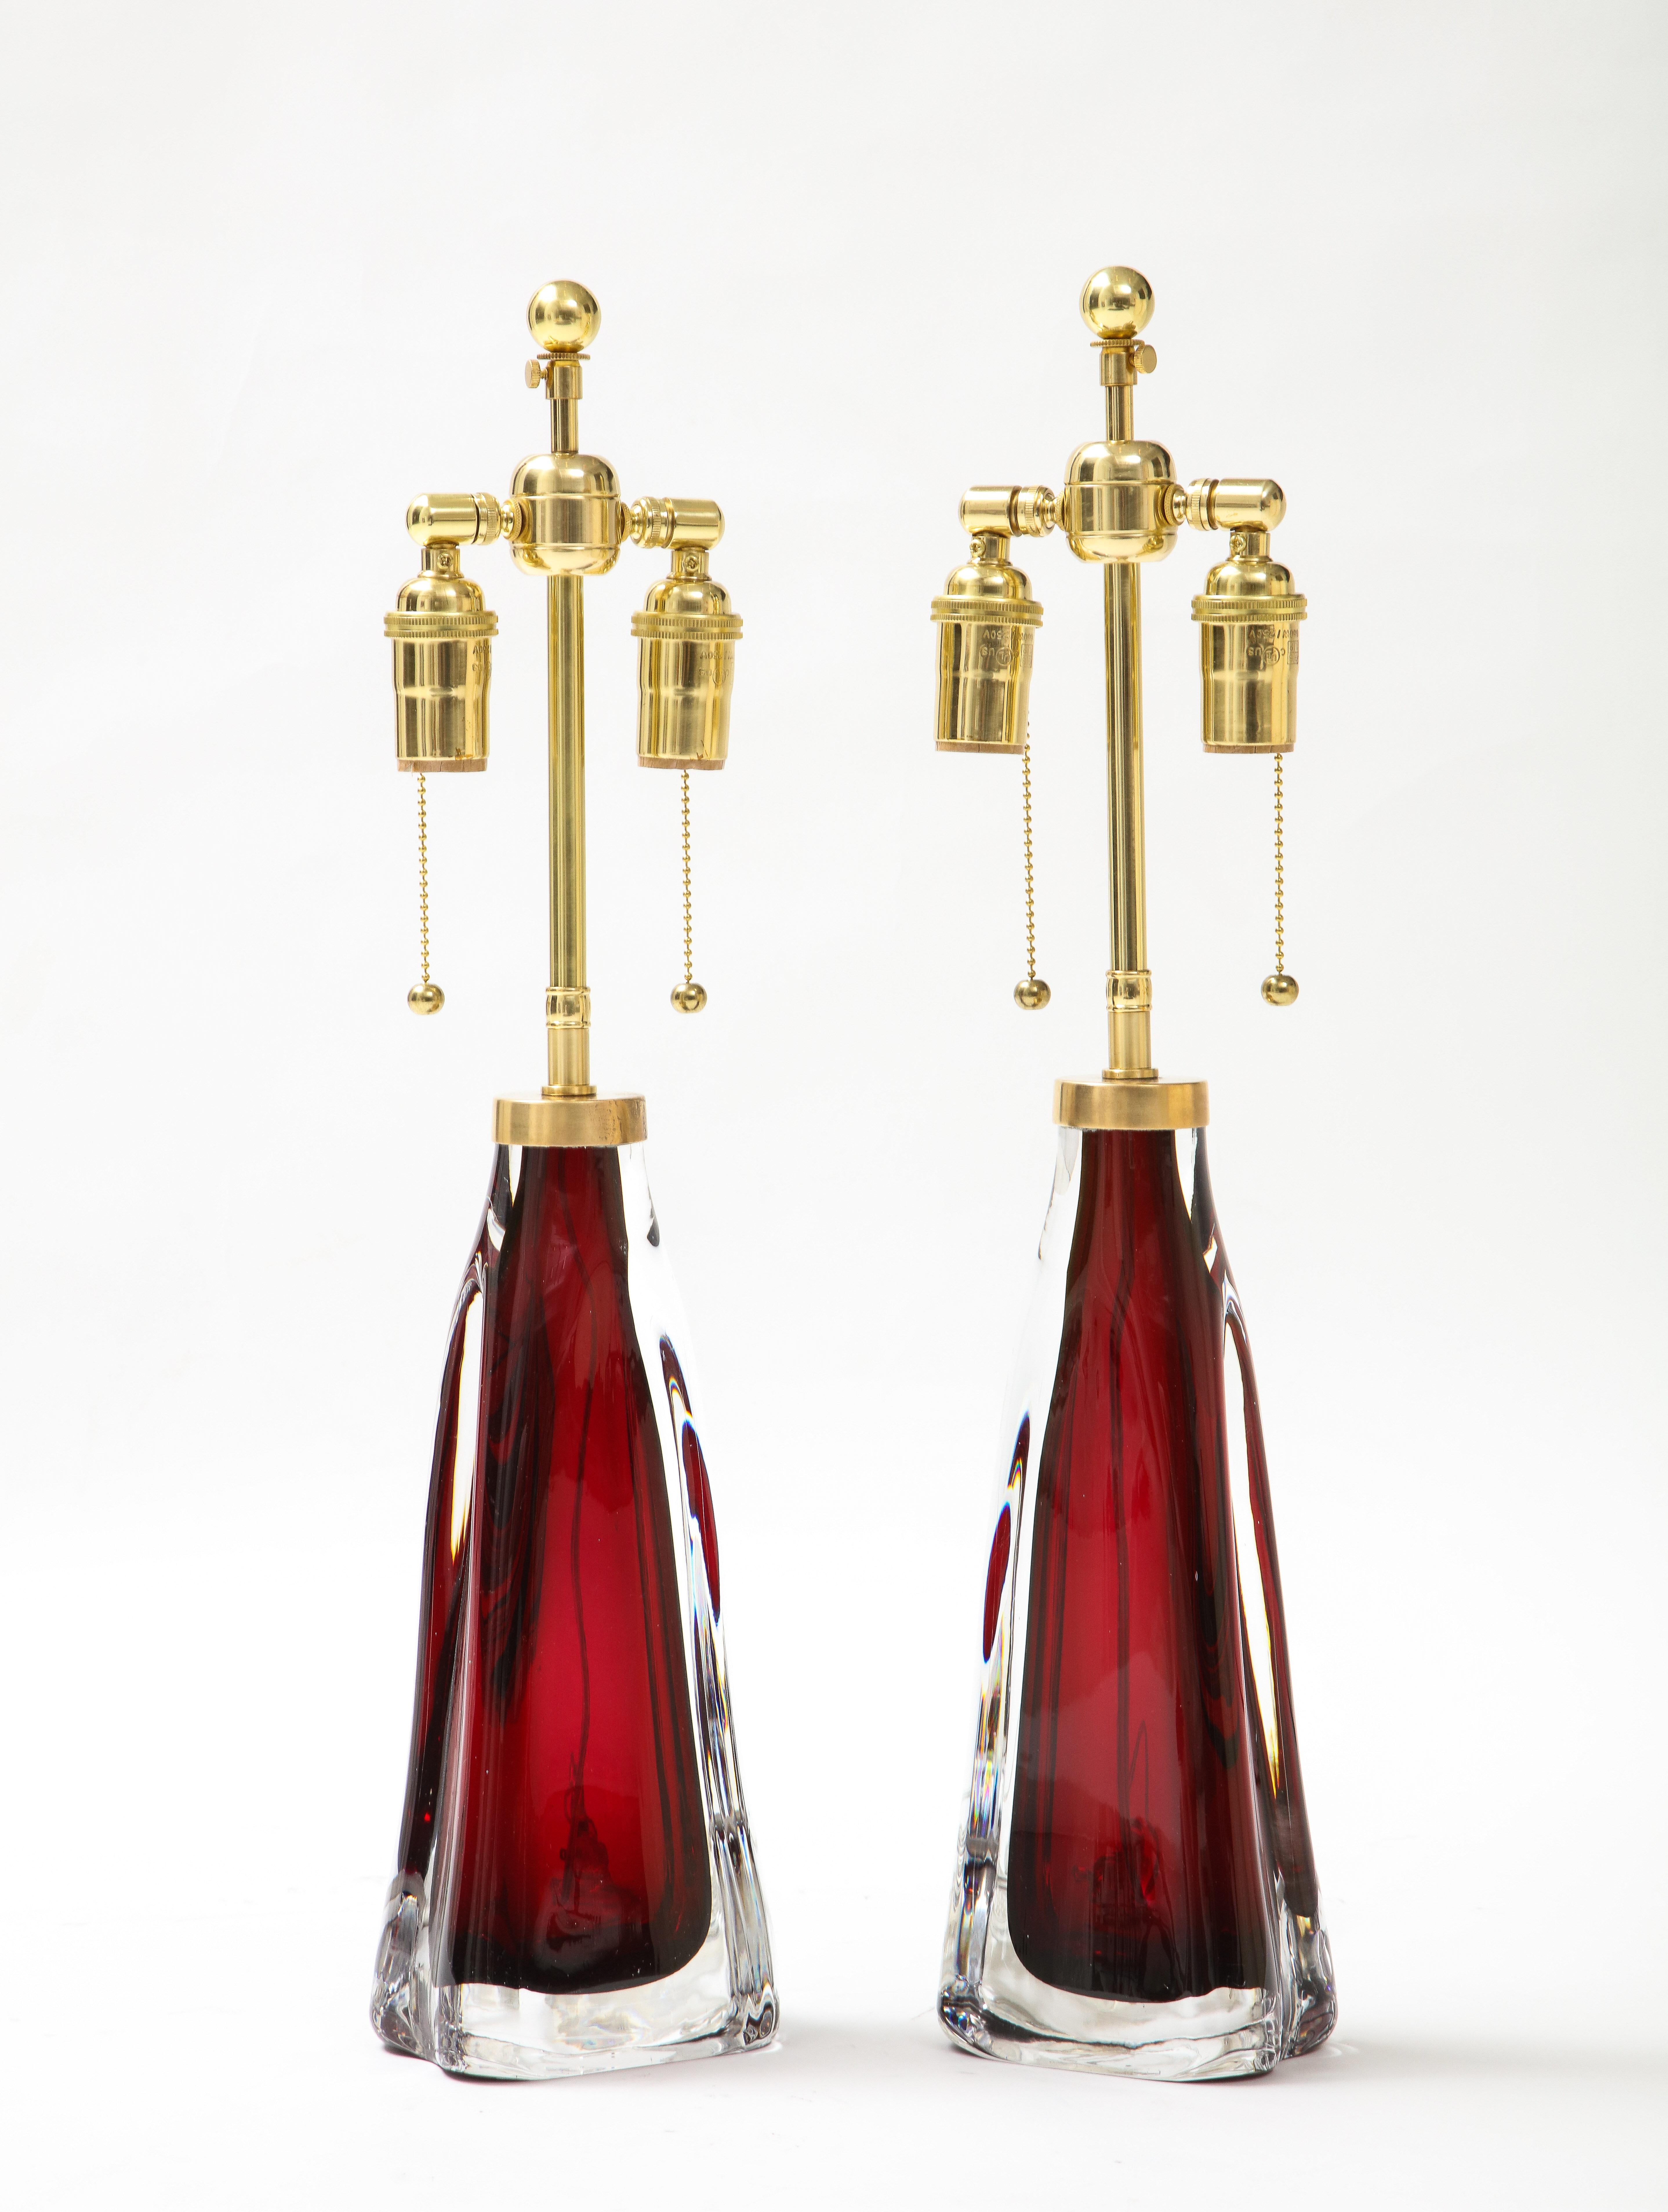 Pair of large crystal lamps lamps in a beautiful ruby red color by Orrefors.
The lamps have been Newly rewired with adjustable brass double clusters that take standard size light bulbs.
The height to the finial is 23.5